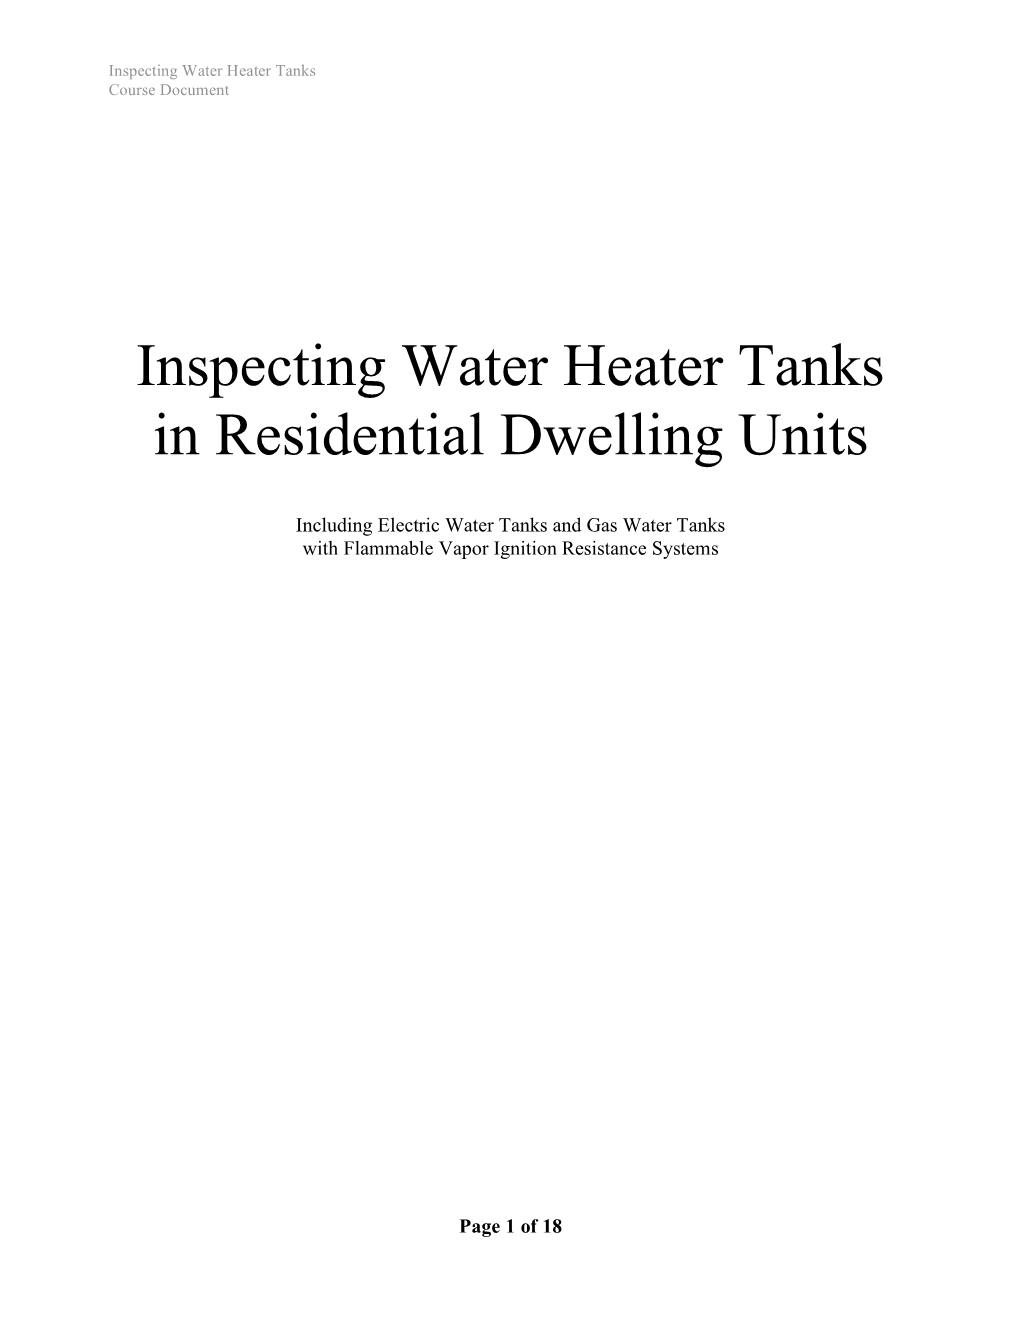 Inspecting Water Heater Tanks in Residential Dwelling Units